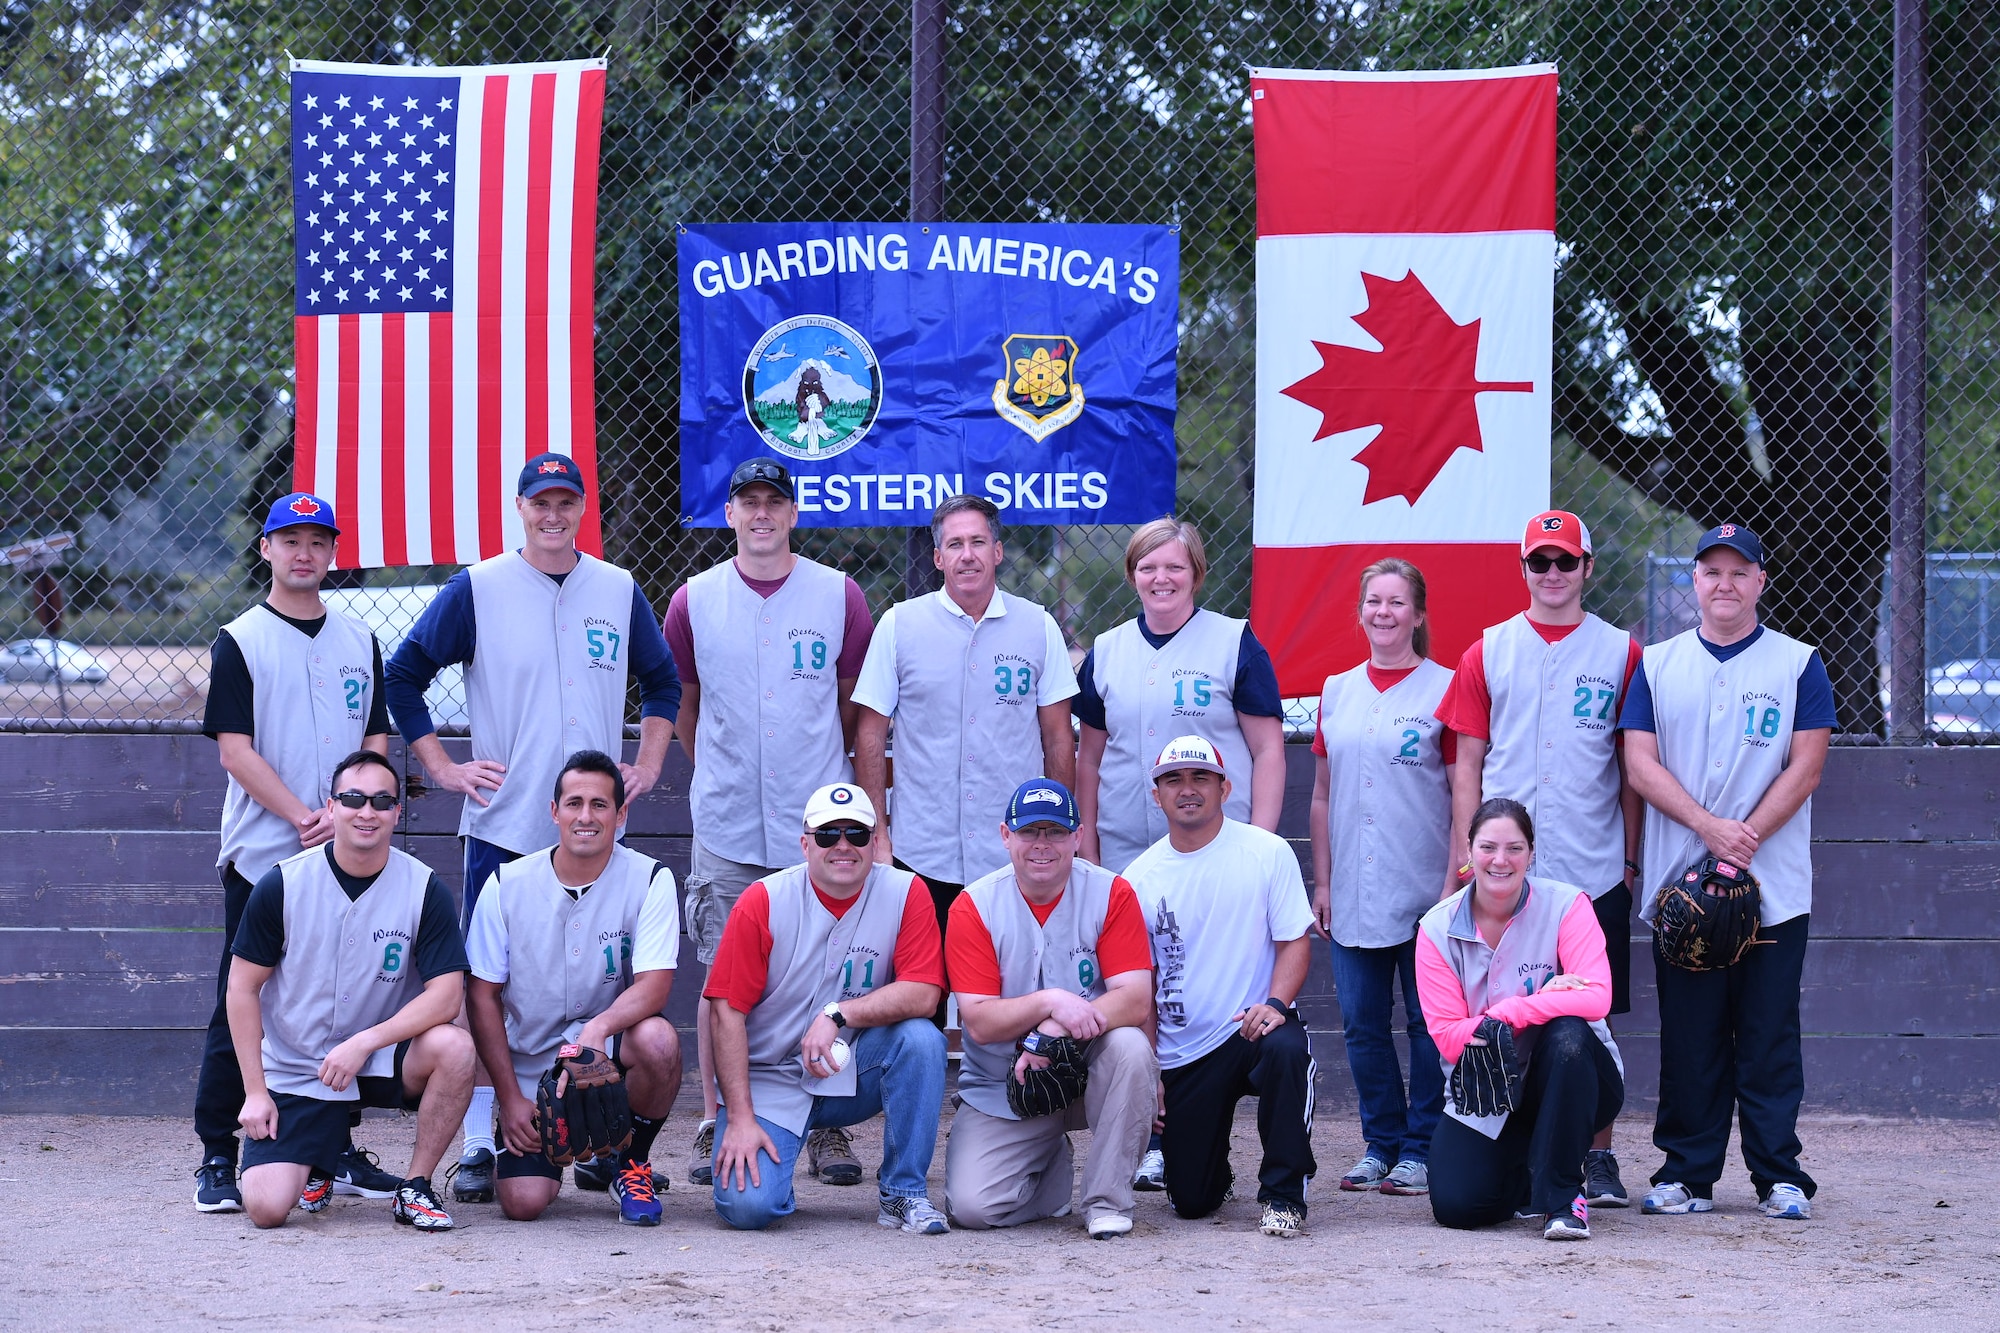 The Canadian Detachment softball team poses for a photo prior to the start of the Western Air Defense Sector U.S. vs Canada Softball Challenge Cup Sept. 1.  Pictured from left to right are: (back row)  Capt. Victor Choi, Major Brian Kynaston, Capt. Sean Anderson, Warrant Officer Gilles Turgeon, Capt. Barbara Steele, Corina Wappler, Chris Berkman, and Master Cpl. Brian Berkman. (Front row) Capt. Kenneth Mui, Major Marcelo Plada, Lt. Col. Matthew Wappler, Warrant Officer Richard Martin, Master Sgt. Gerald Sampson, and Kim Miller. (U.S. Air National Guard photo by Kimberly D. Burke)